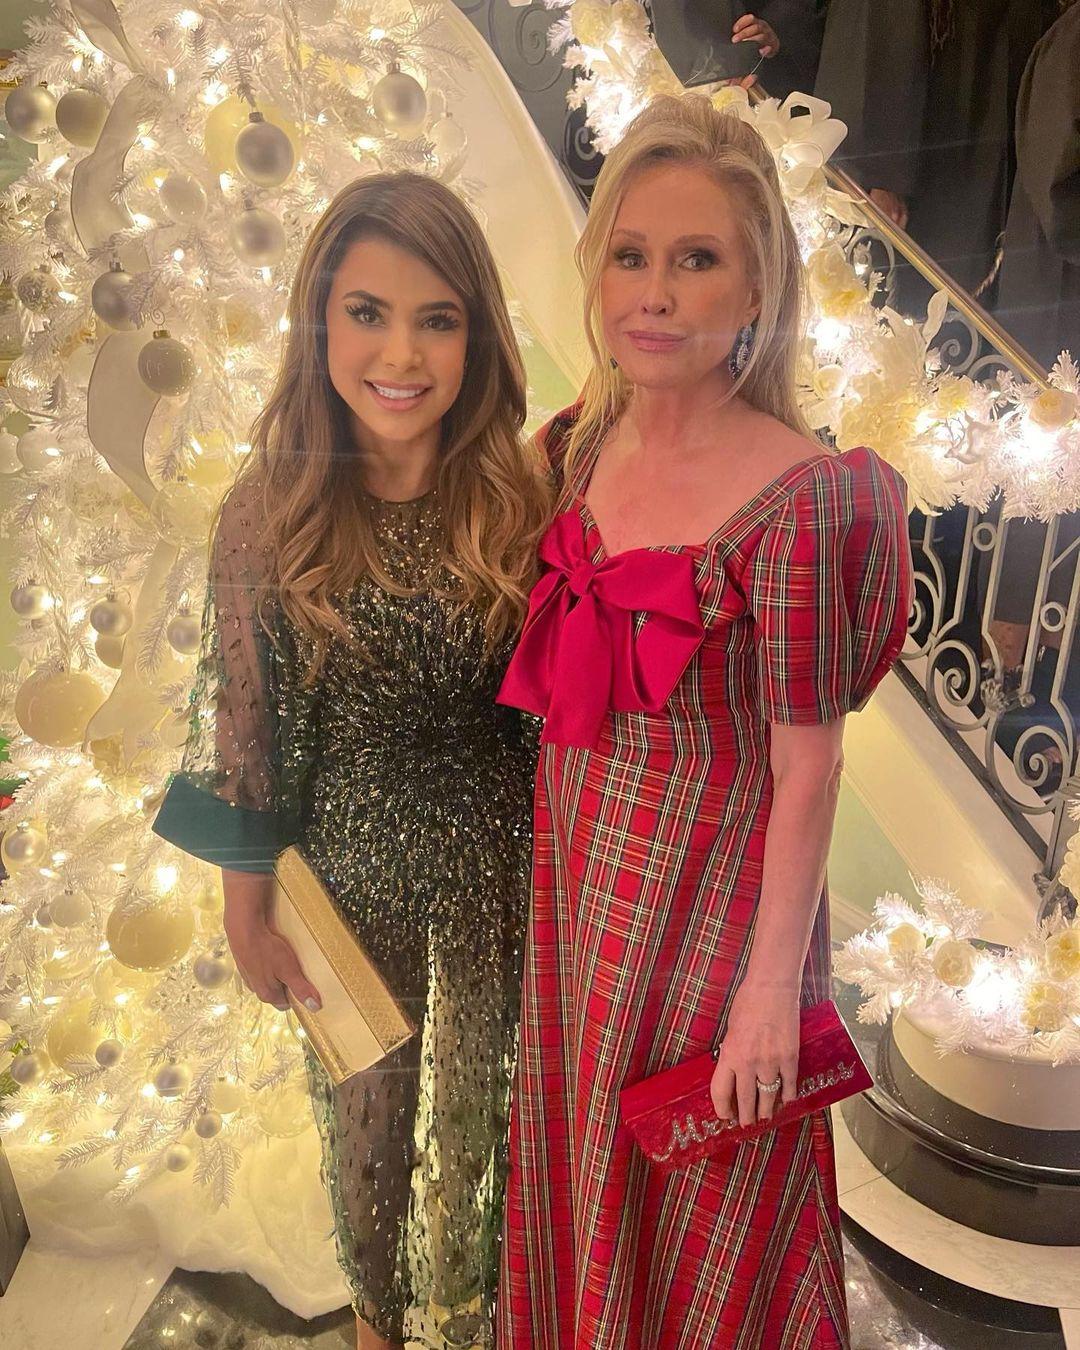 Fans Slam Paula Abdul For Allegedly Photoshopping Her Face In Christmas Party Pictures